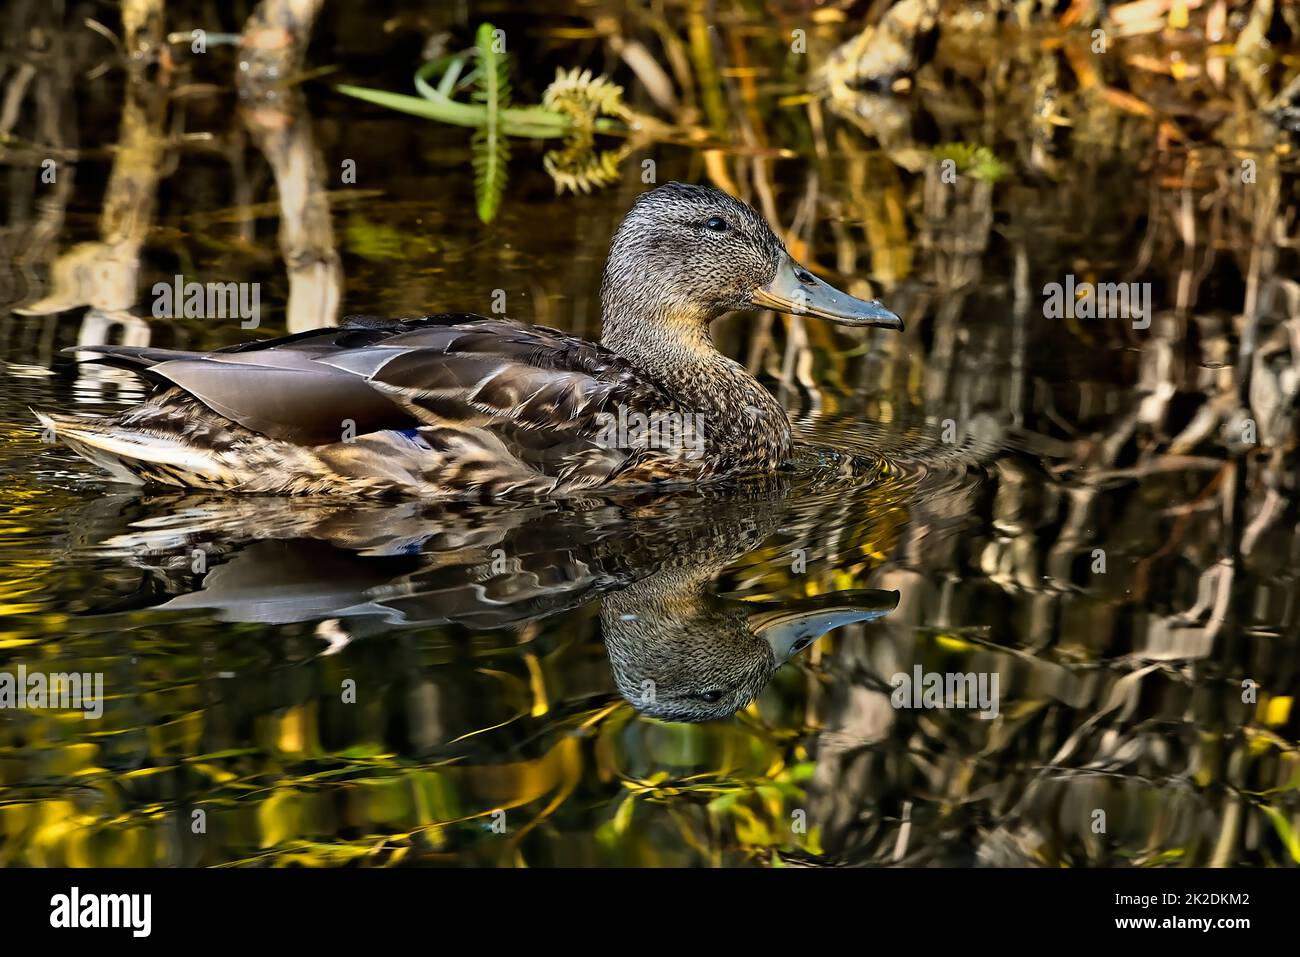 A close up image of a Mallard duck 'Anas platyrhynchos', swimming in a still pond with vegetation reflecting  in a wetland pond in rural Alberta Canad Stock Photo